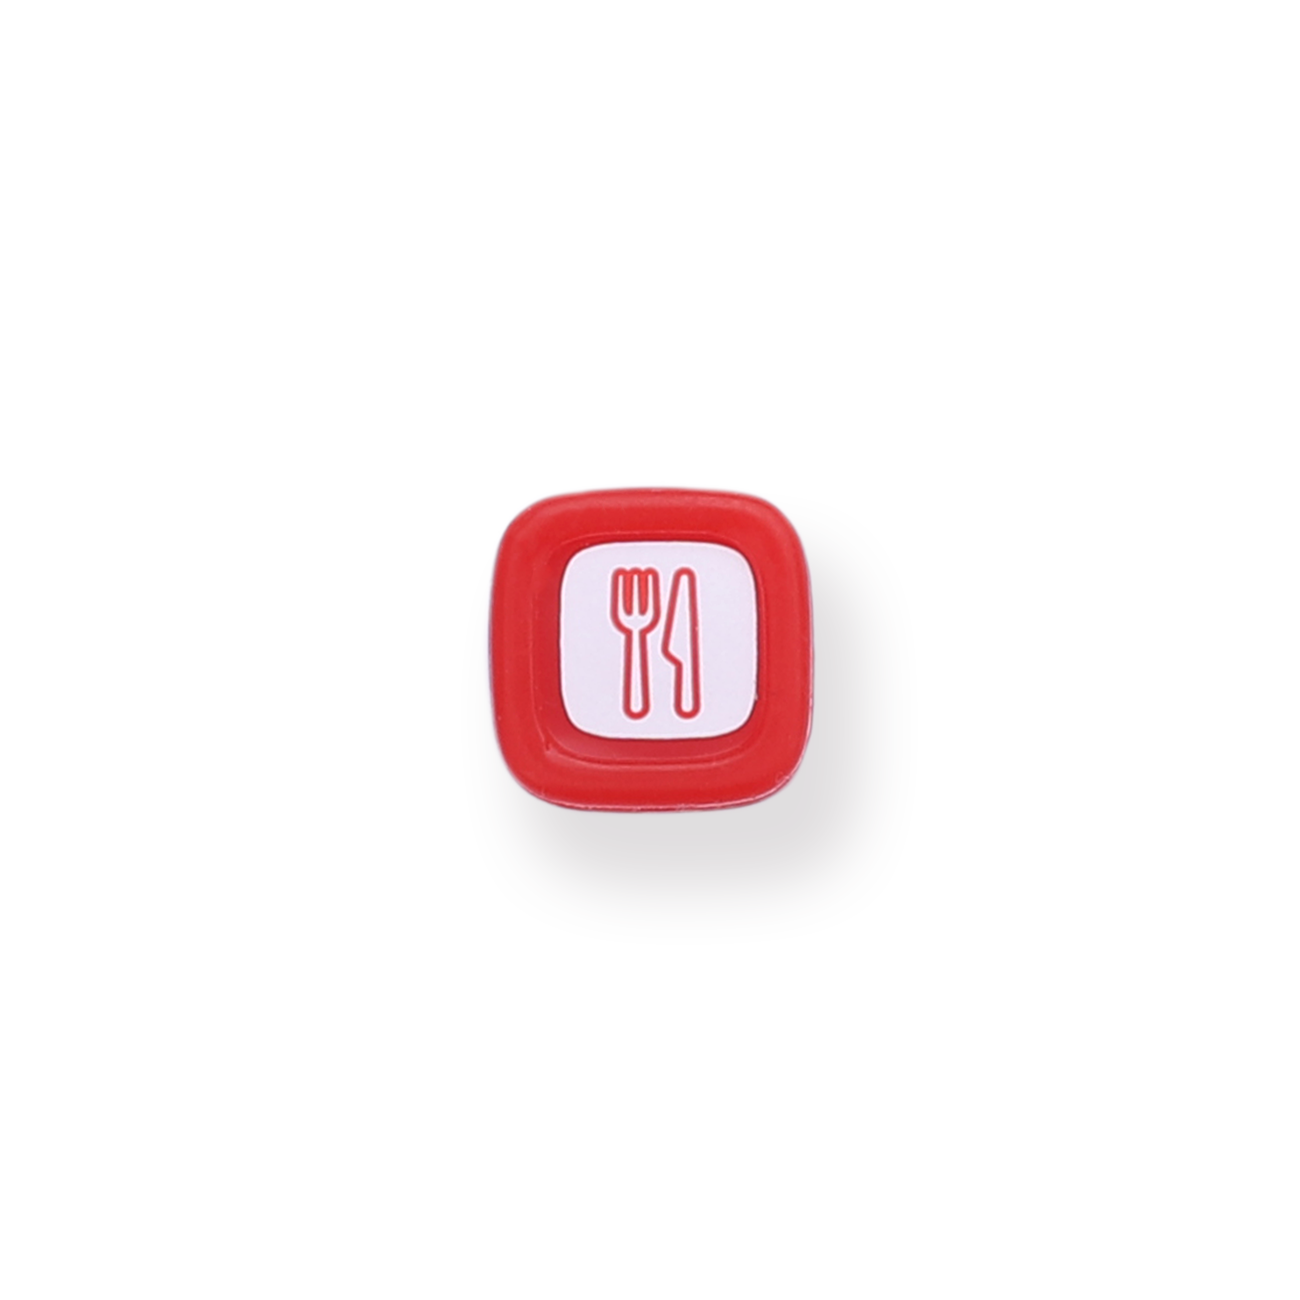 Pilot FriXion Stamp - Red - Meal - Stationery Pal